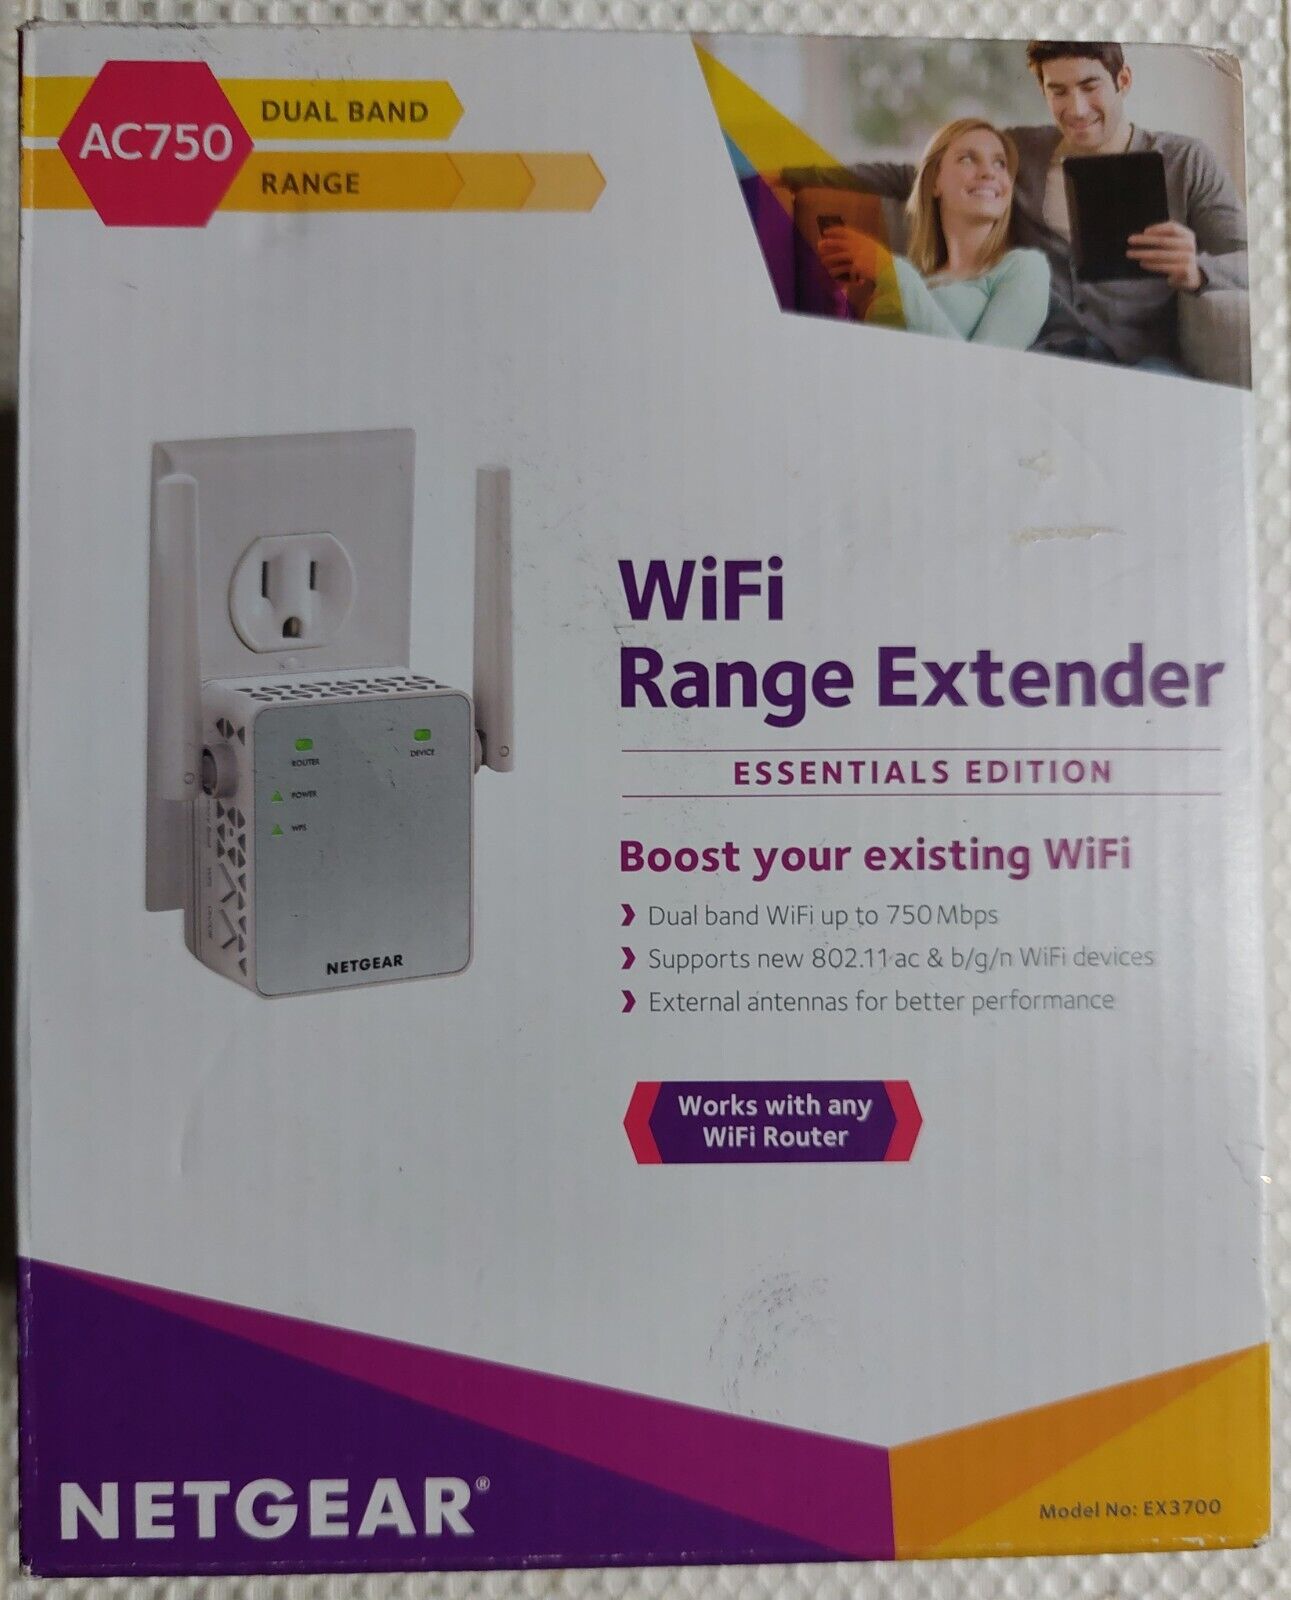 NETGEAR WiFi Range Extender Dual Band 2.4G/5G up to 750 Mbps for any WiFi Router